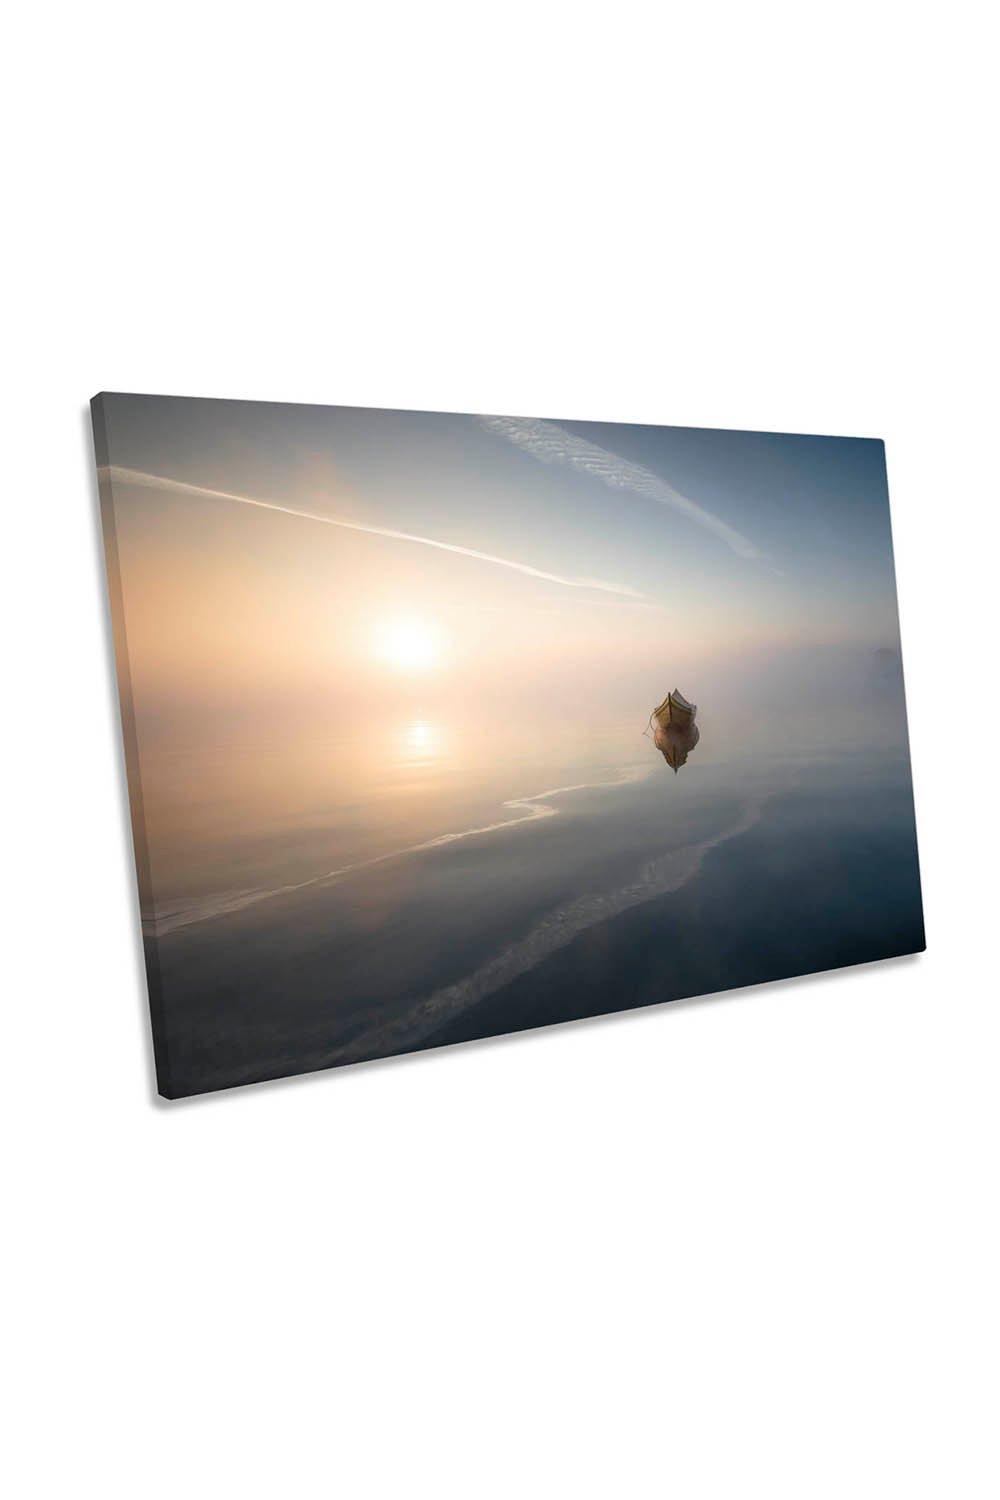 Silence Boat Morning Dawn Peaceful Canvas Wall Art Picture Print